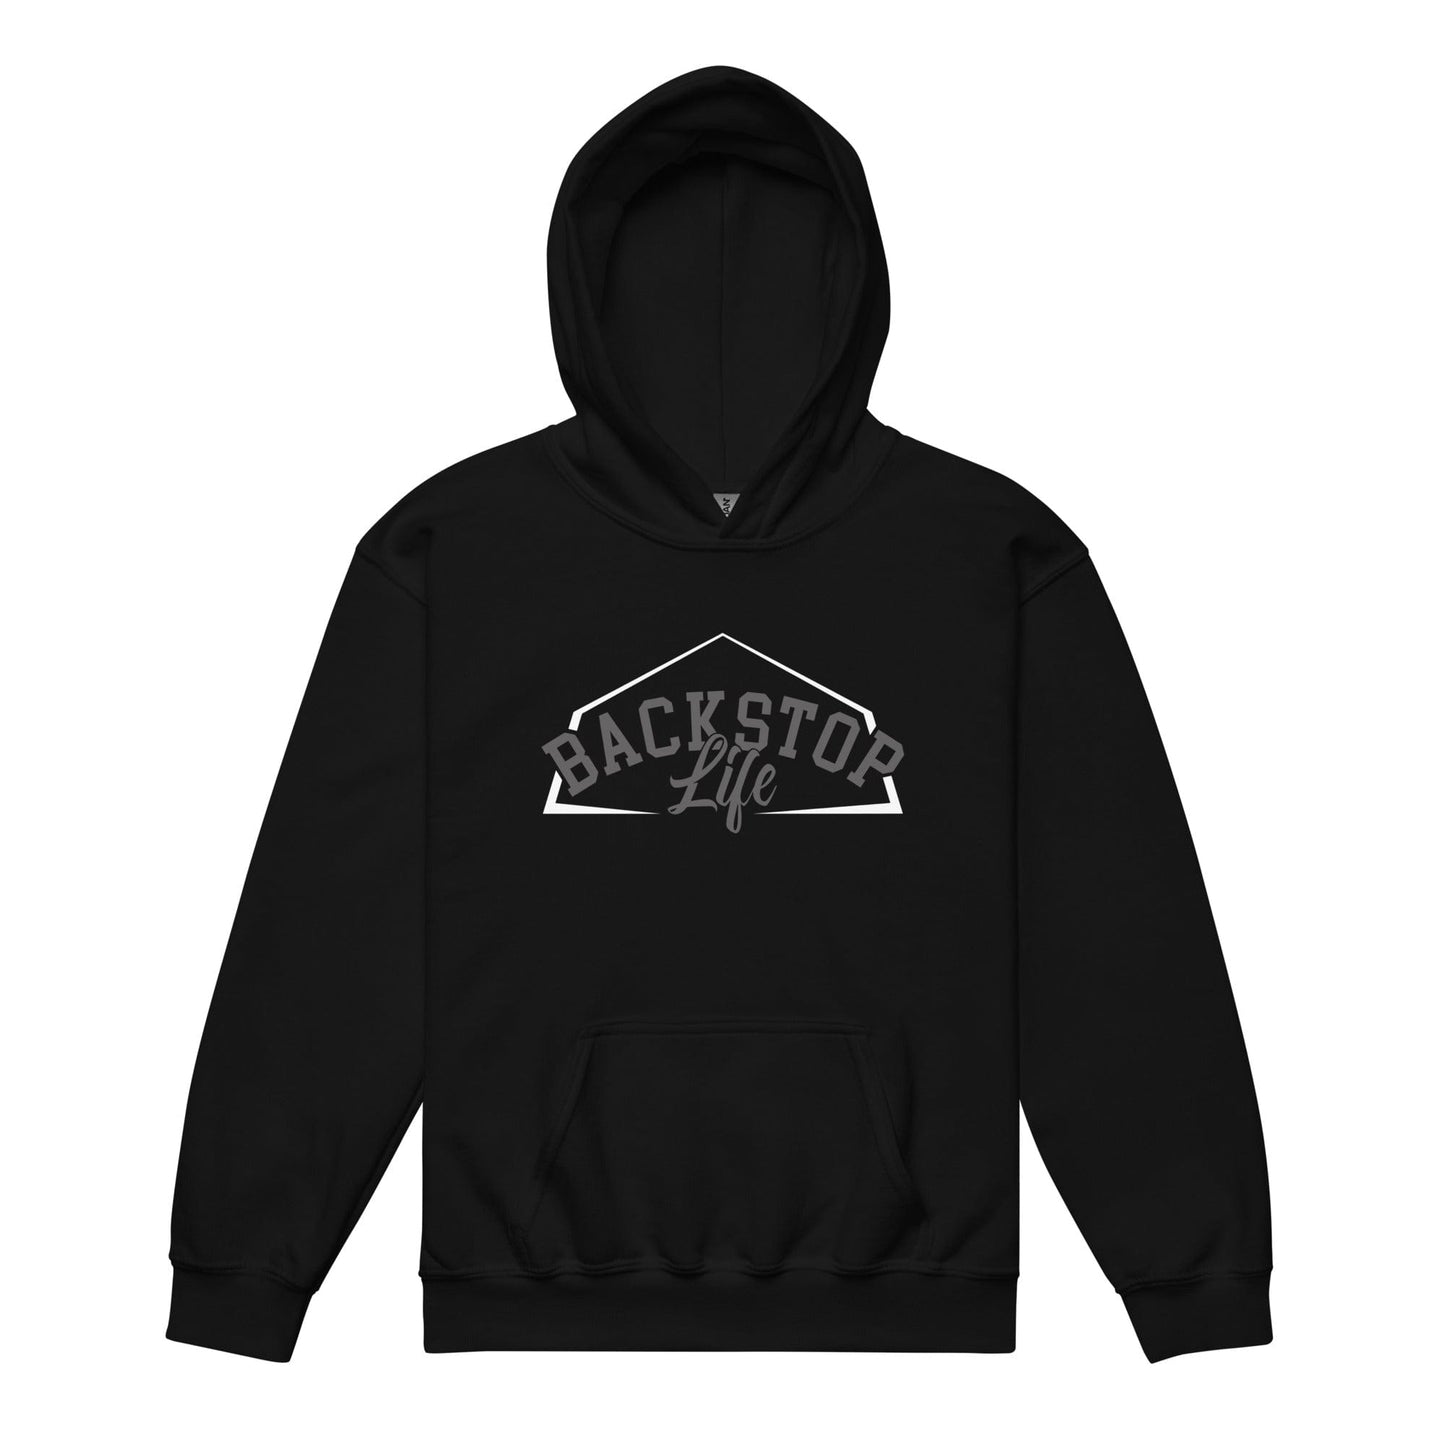 Backstop Life Blackout - Youth Hoodie